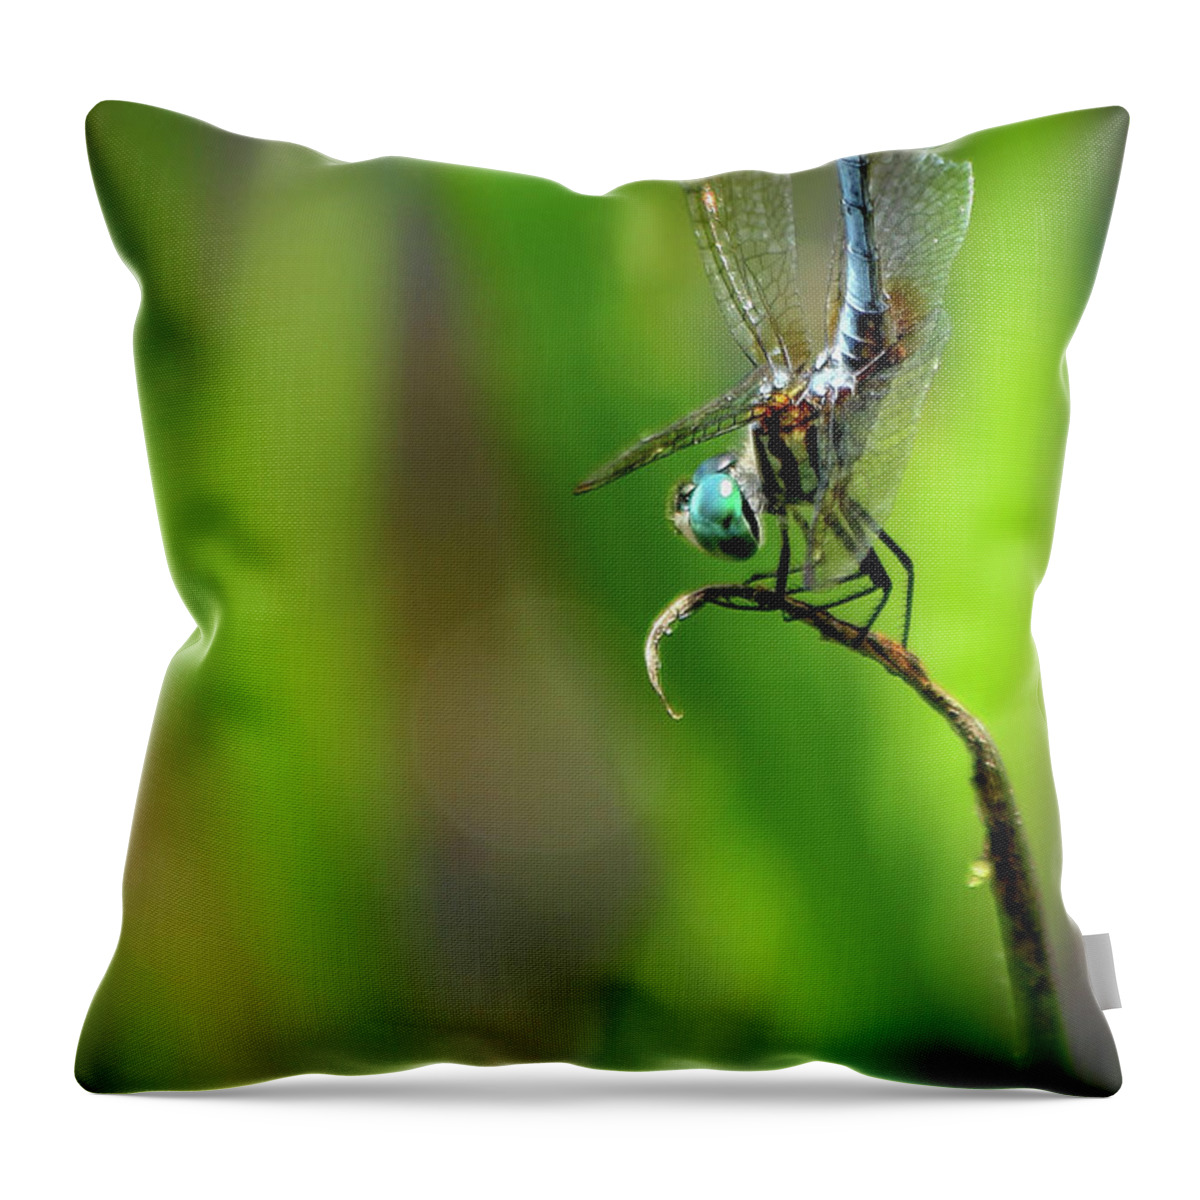 Reid Callaway Dragonfly Art Throw Pillow featuring the photograph The Performer Dragonfly Art by Reid Callaway